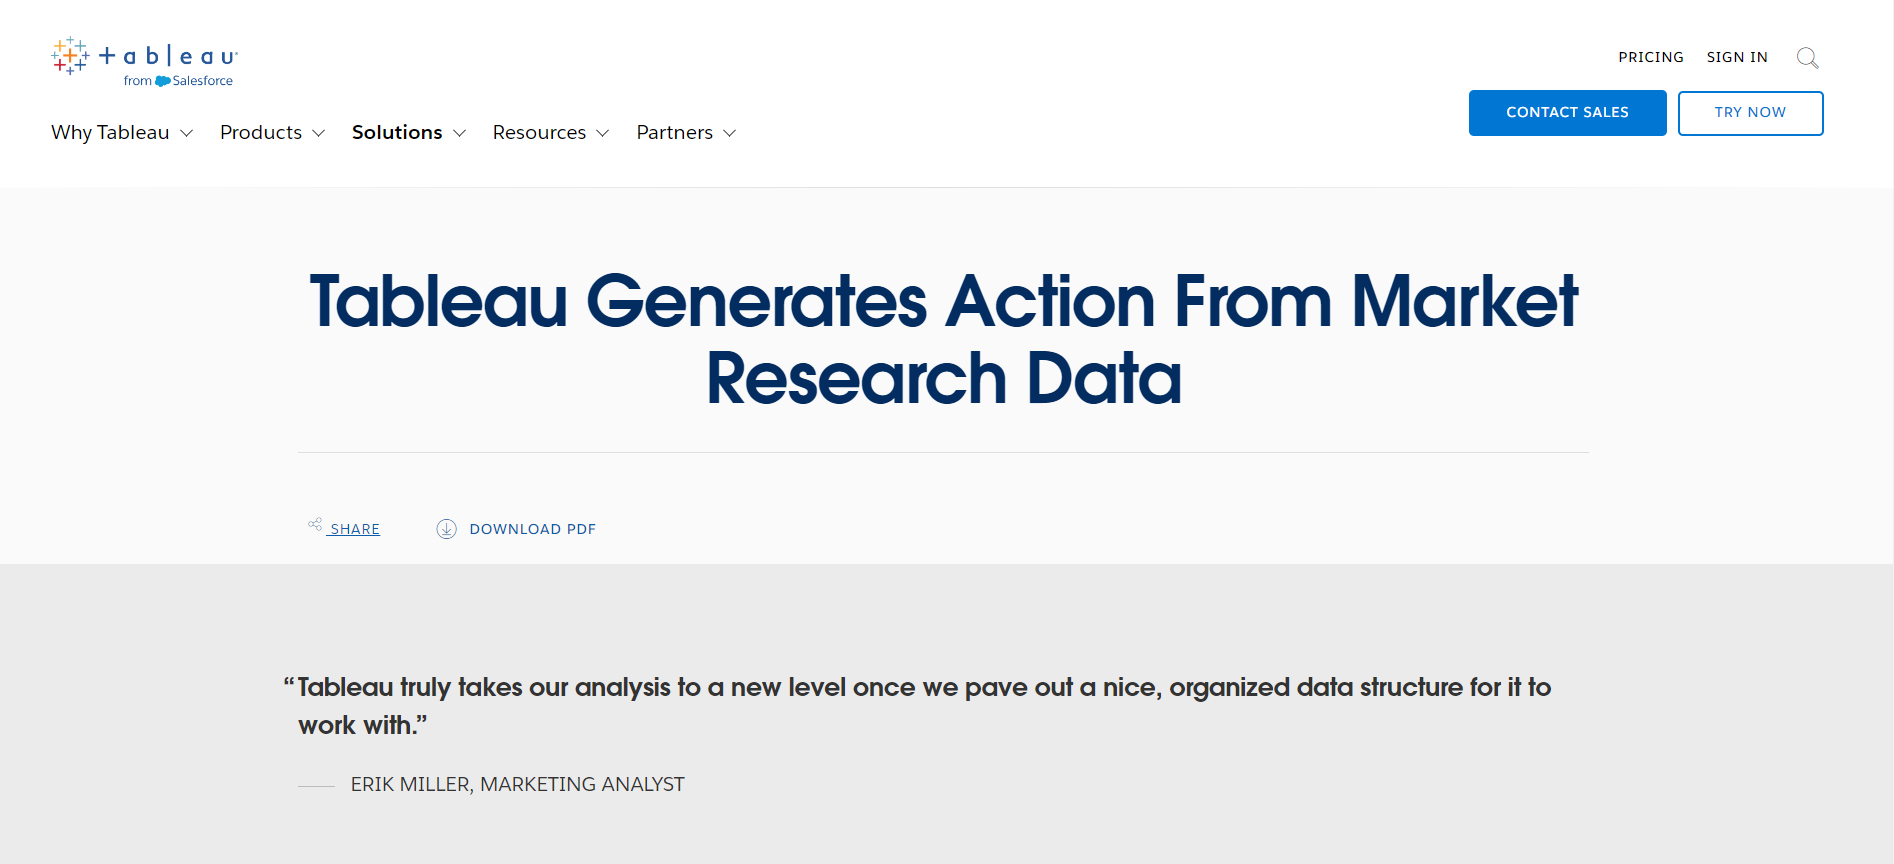 This is the image of the Home page of Tableau - one of the market research platforms. 